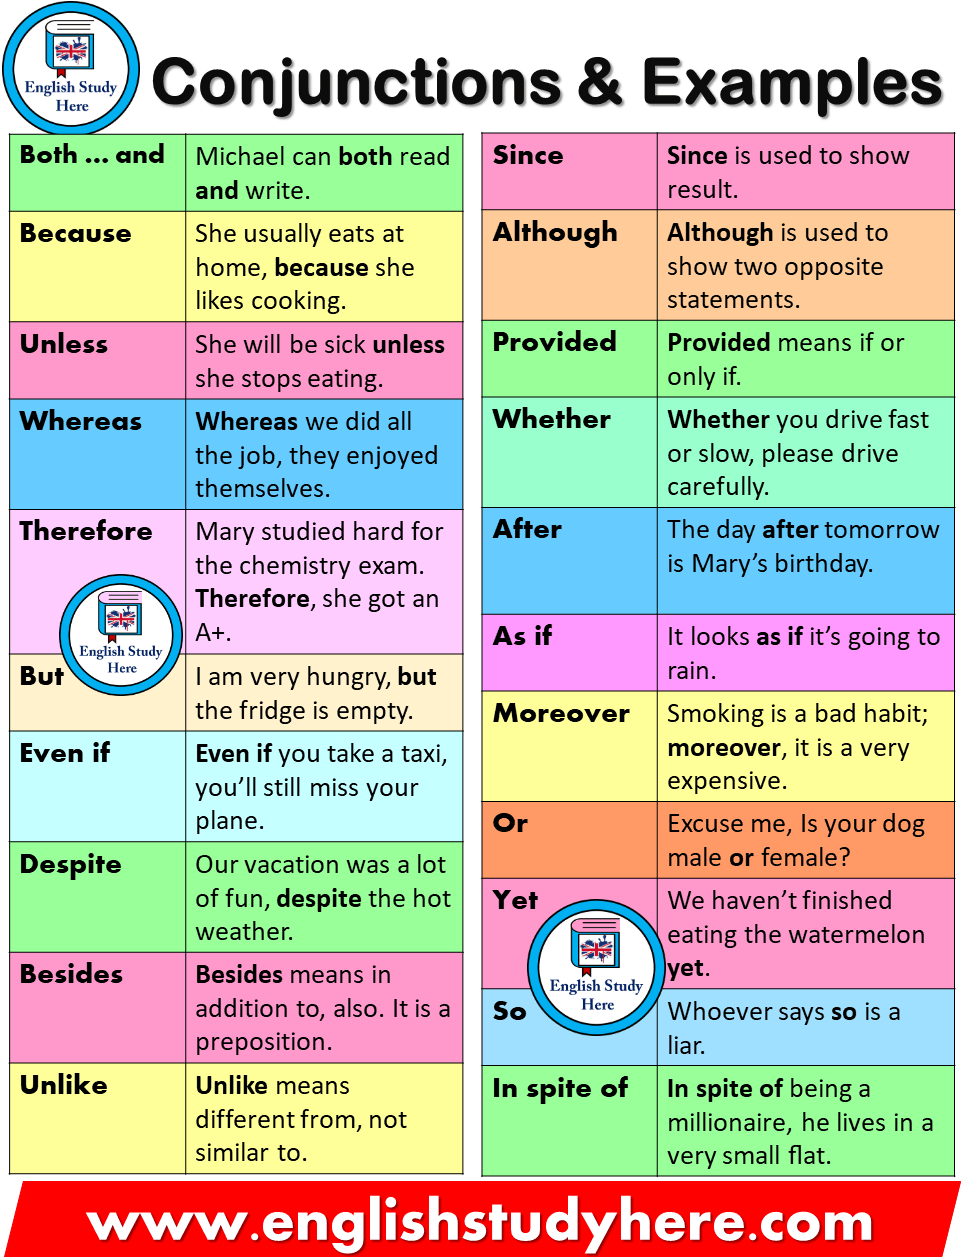 Conjunctions and Example Sentences